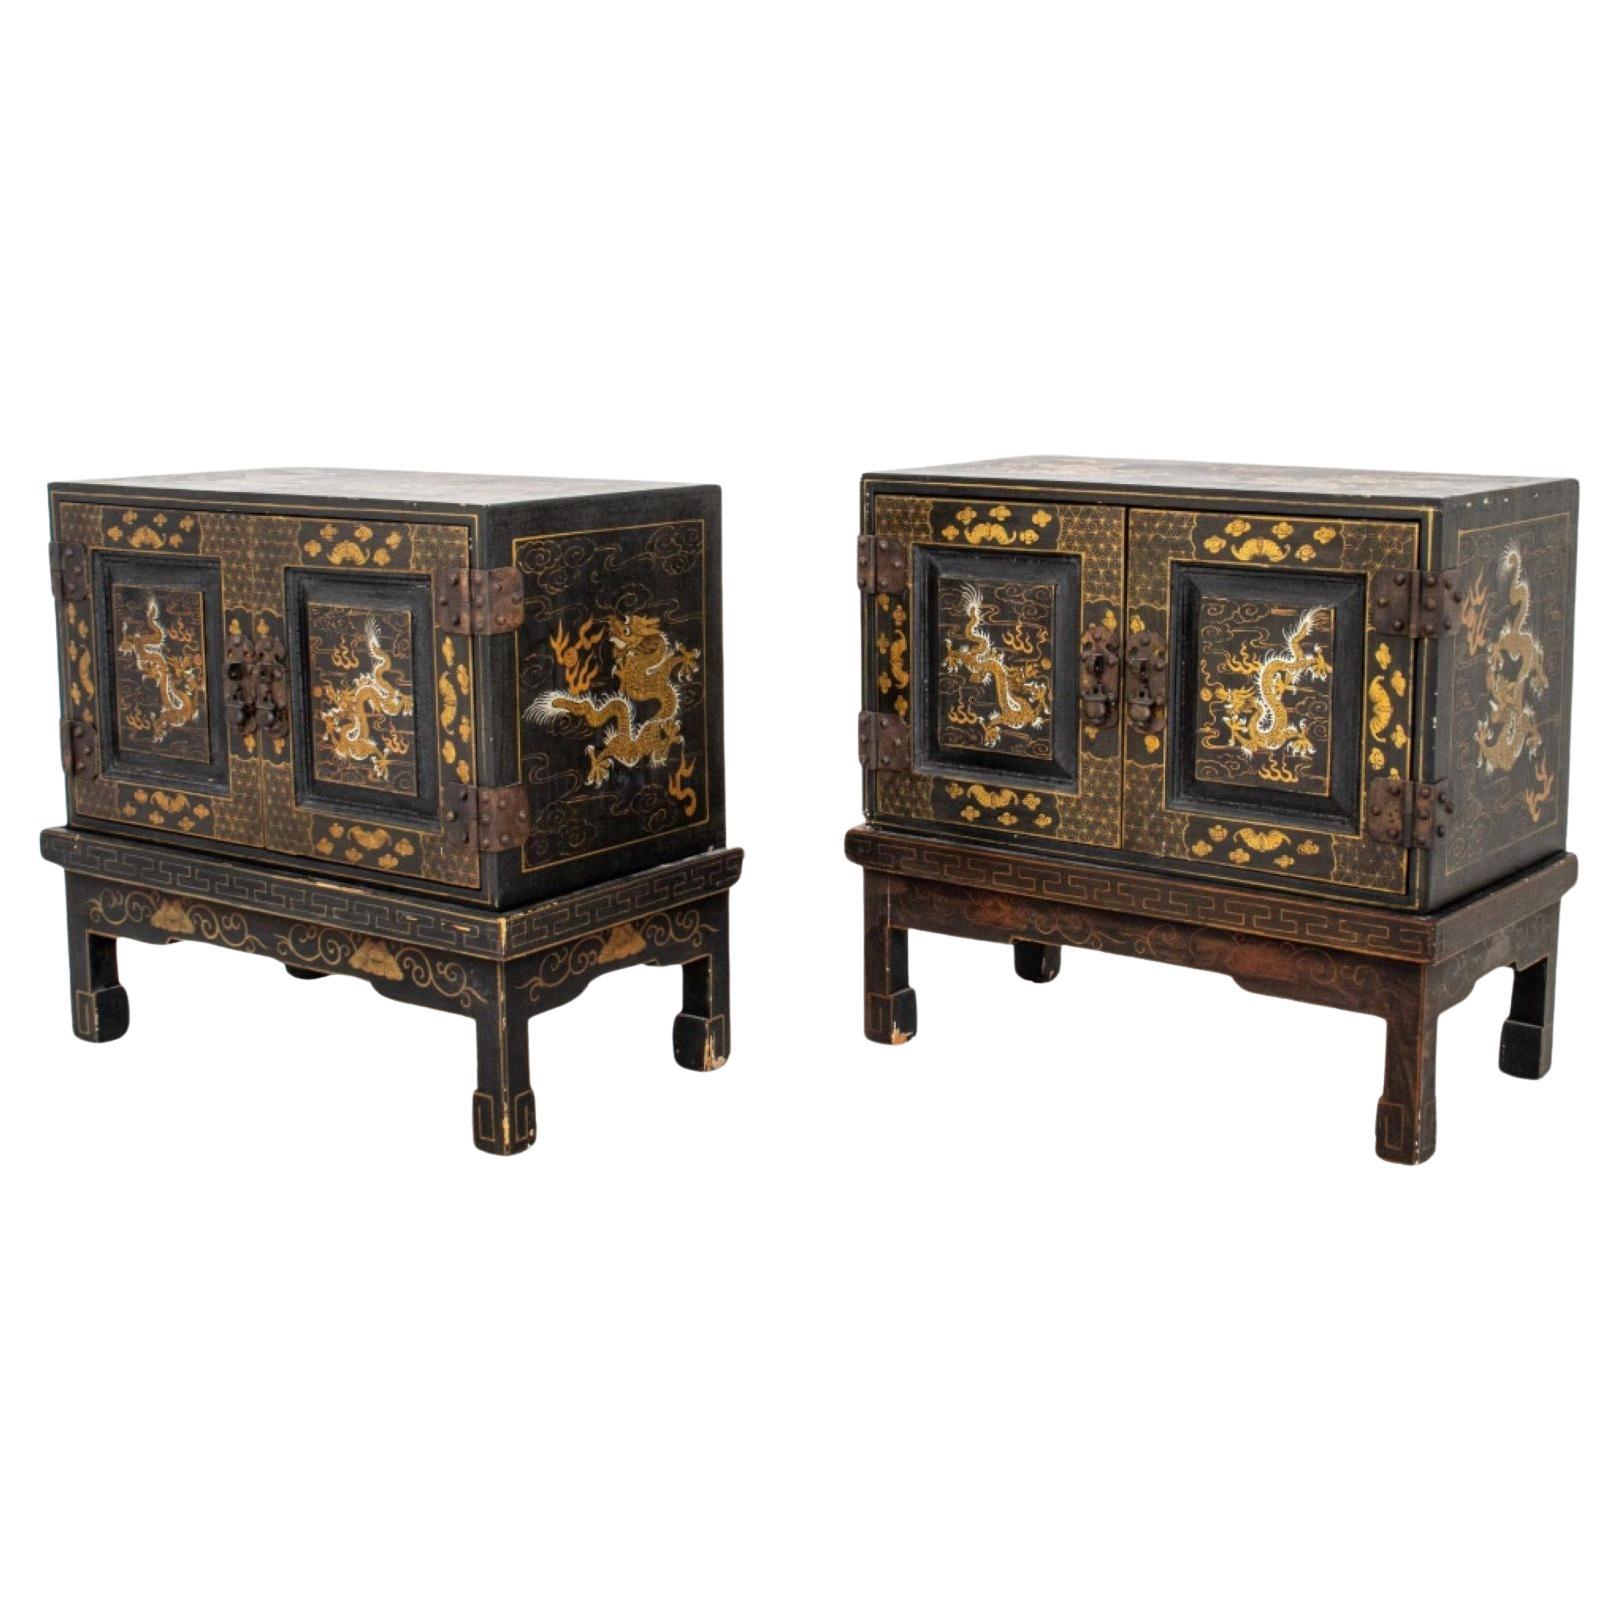 Chinoiserie Black and Gilt Decorated Cabinets, 2